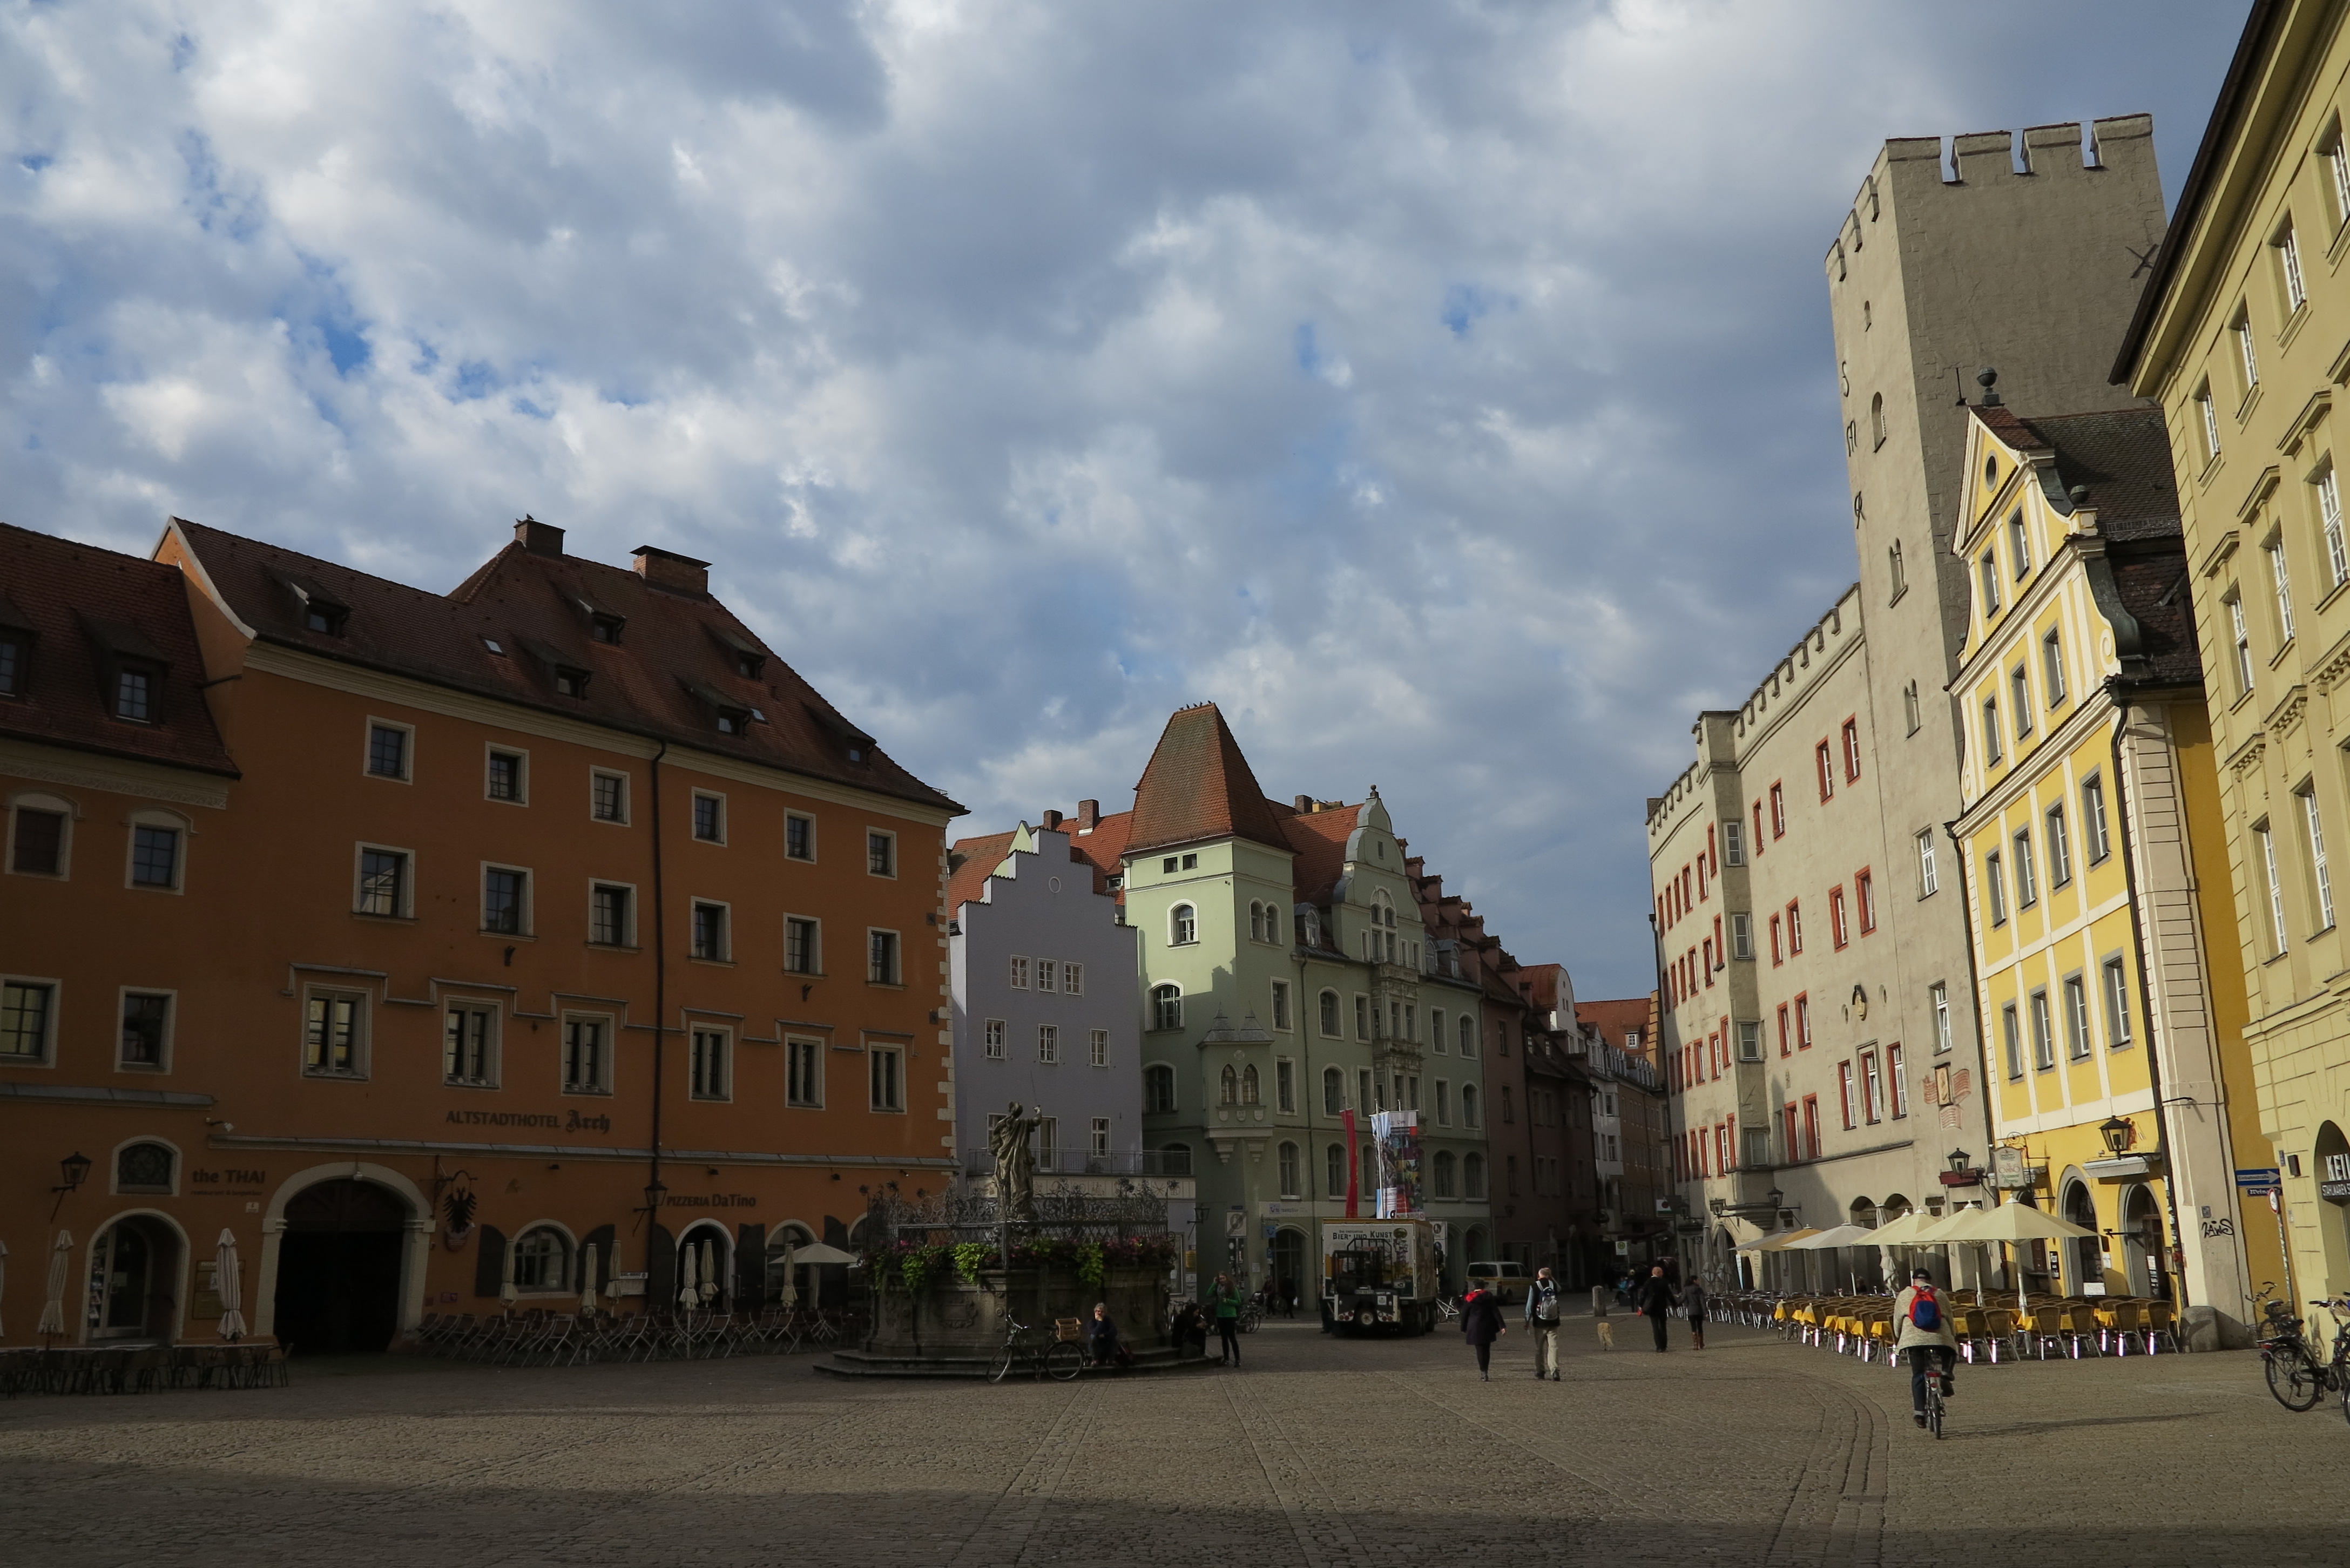 Spared: Regensburg retains much of its old charm because the allies didn't bomb the town after the German army moved out